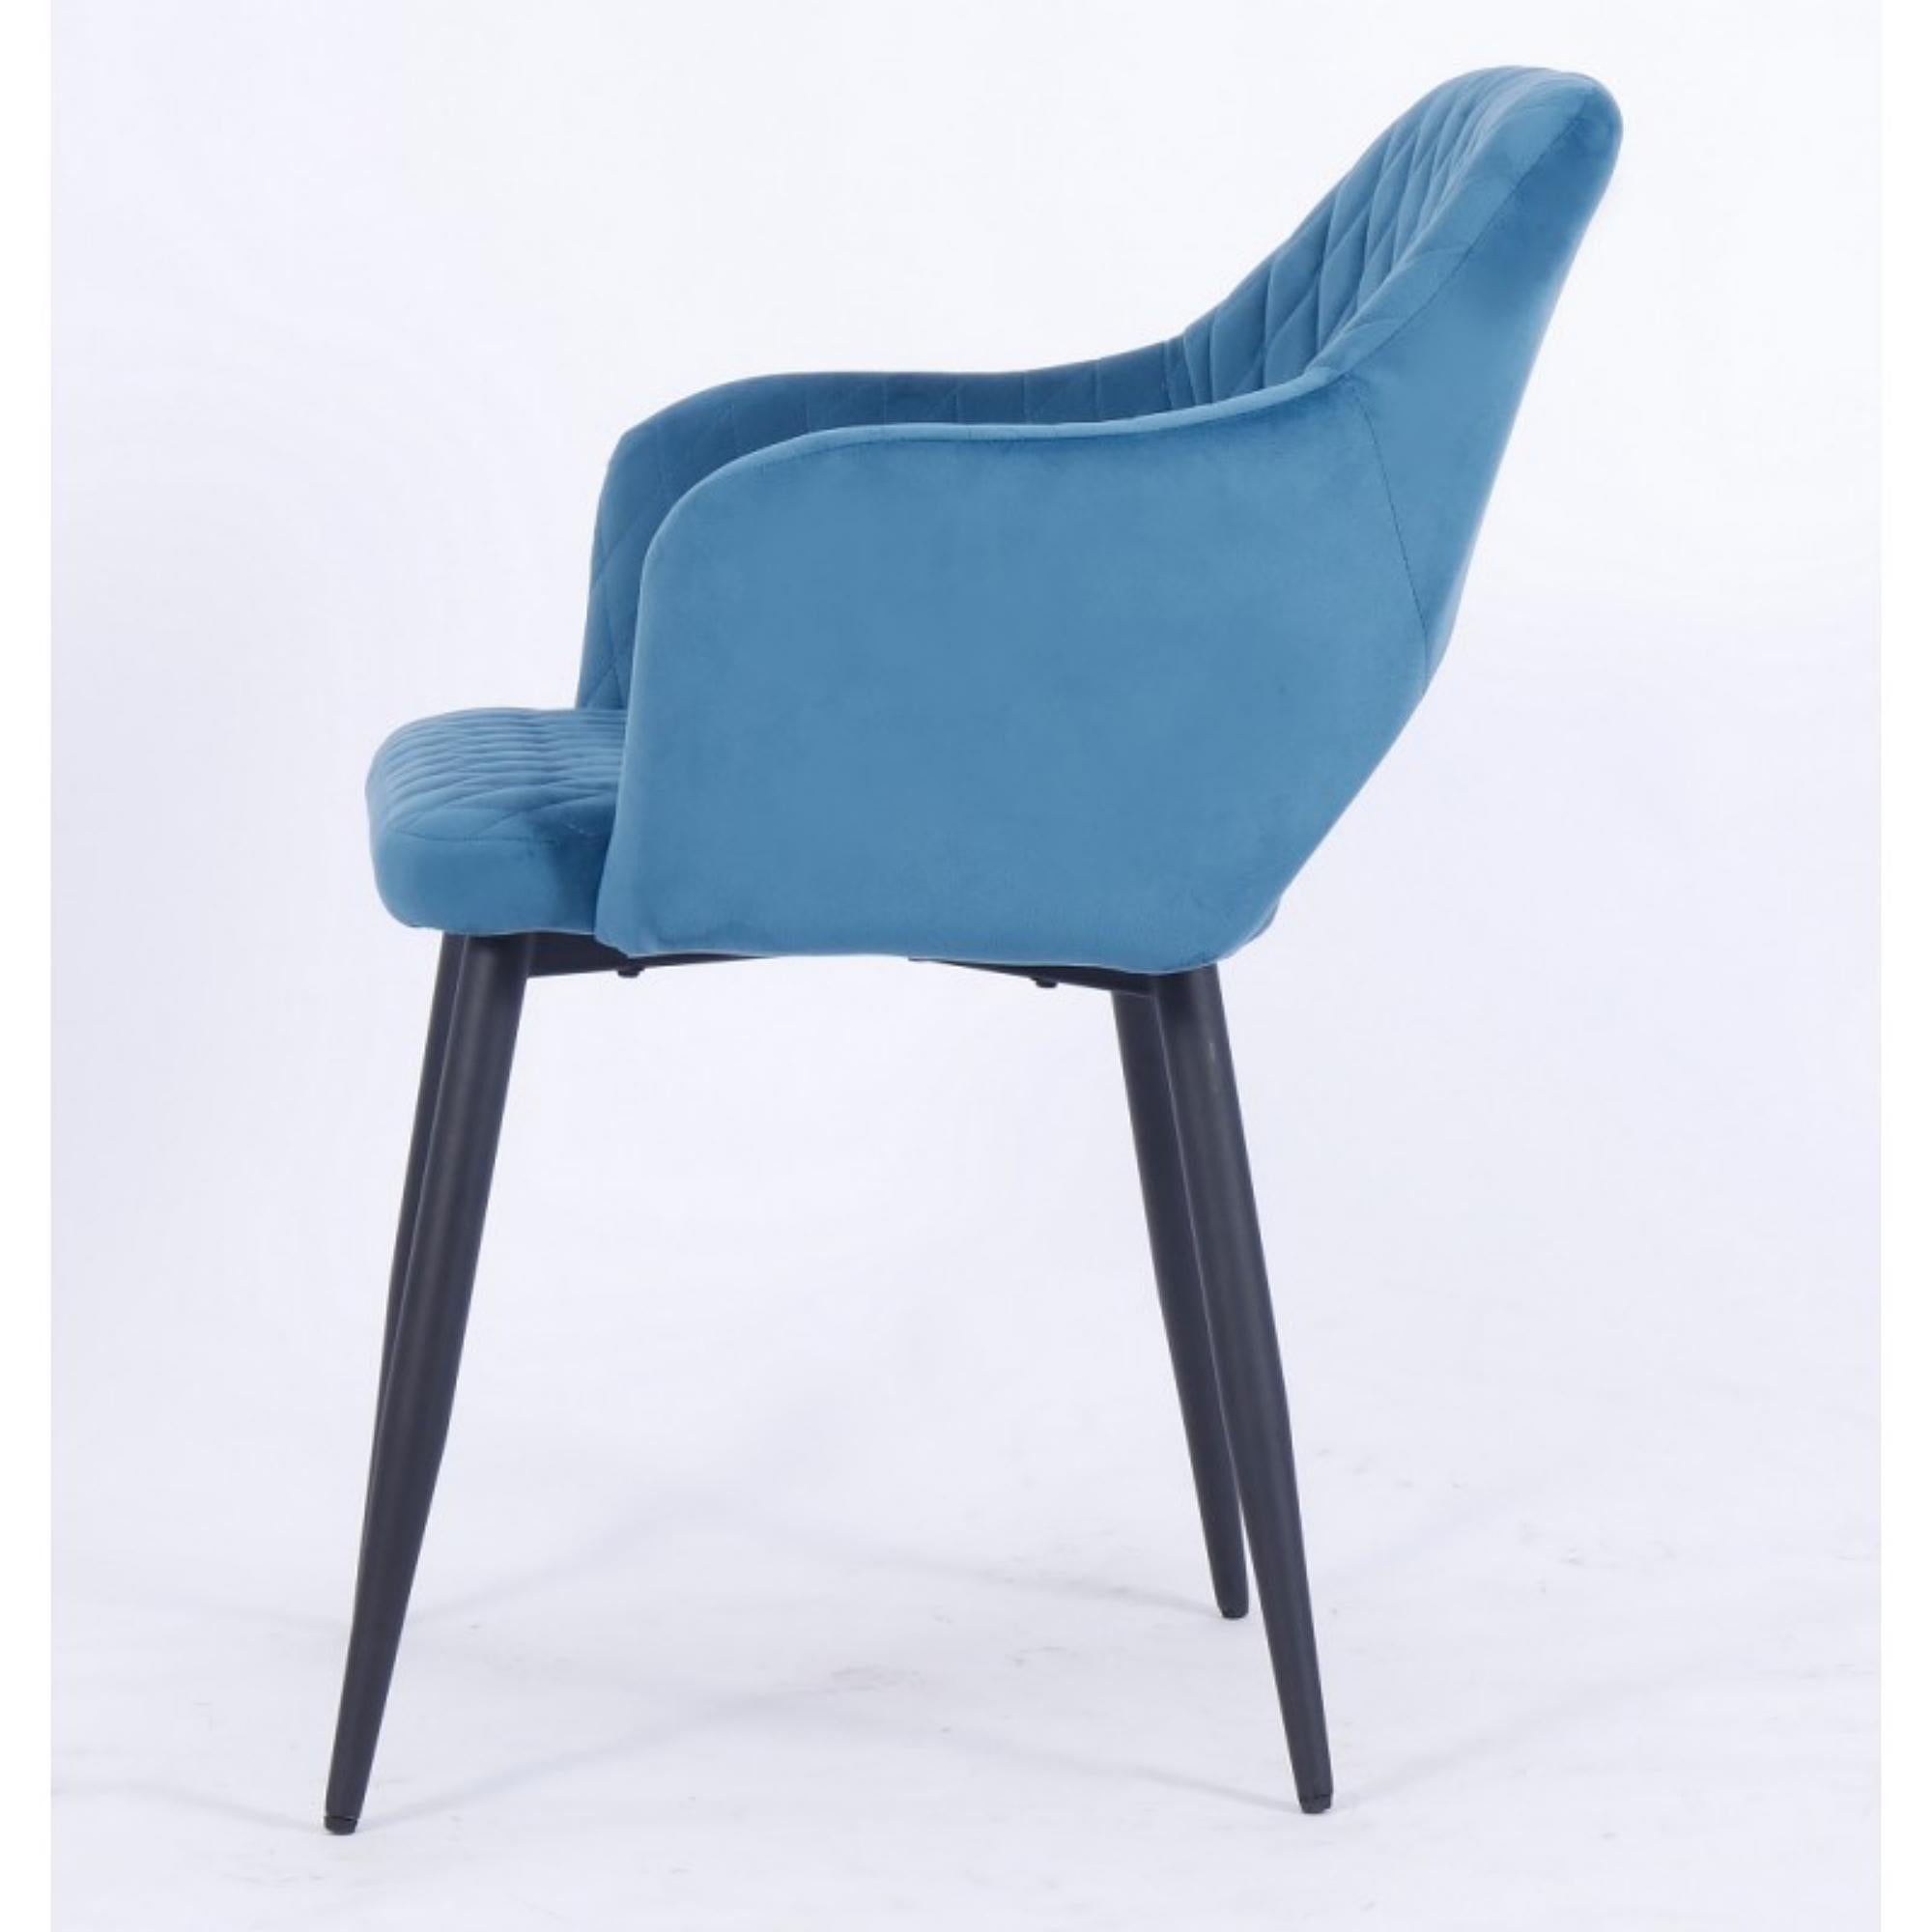 Hand-Crafted Pair of Dark Turquoise Velvet Upholstered Metal Armchair New For Sale